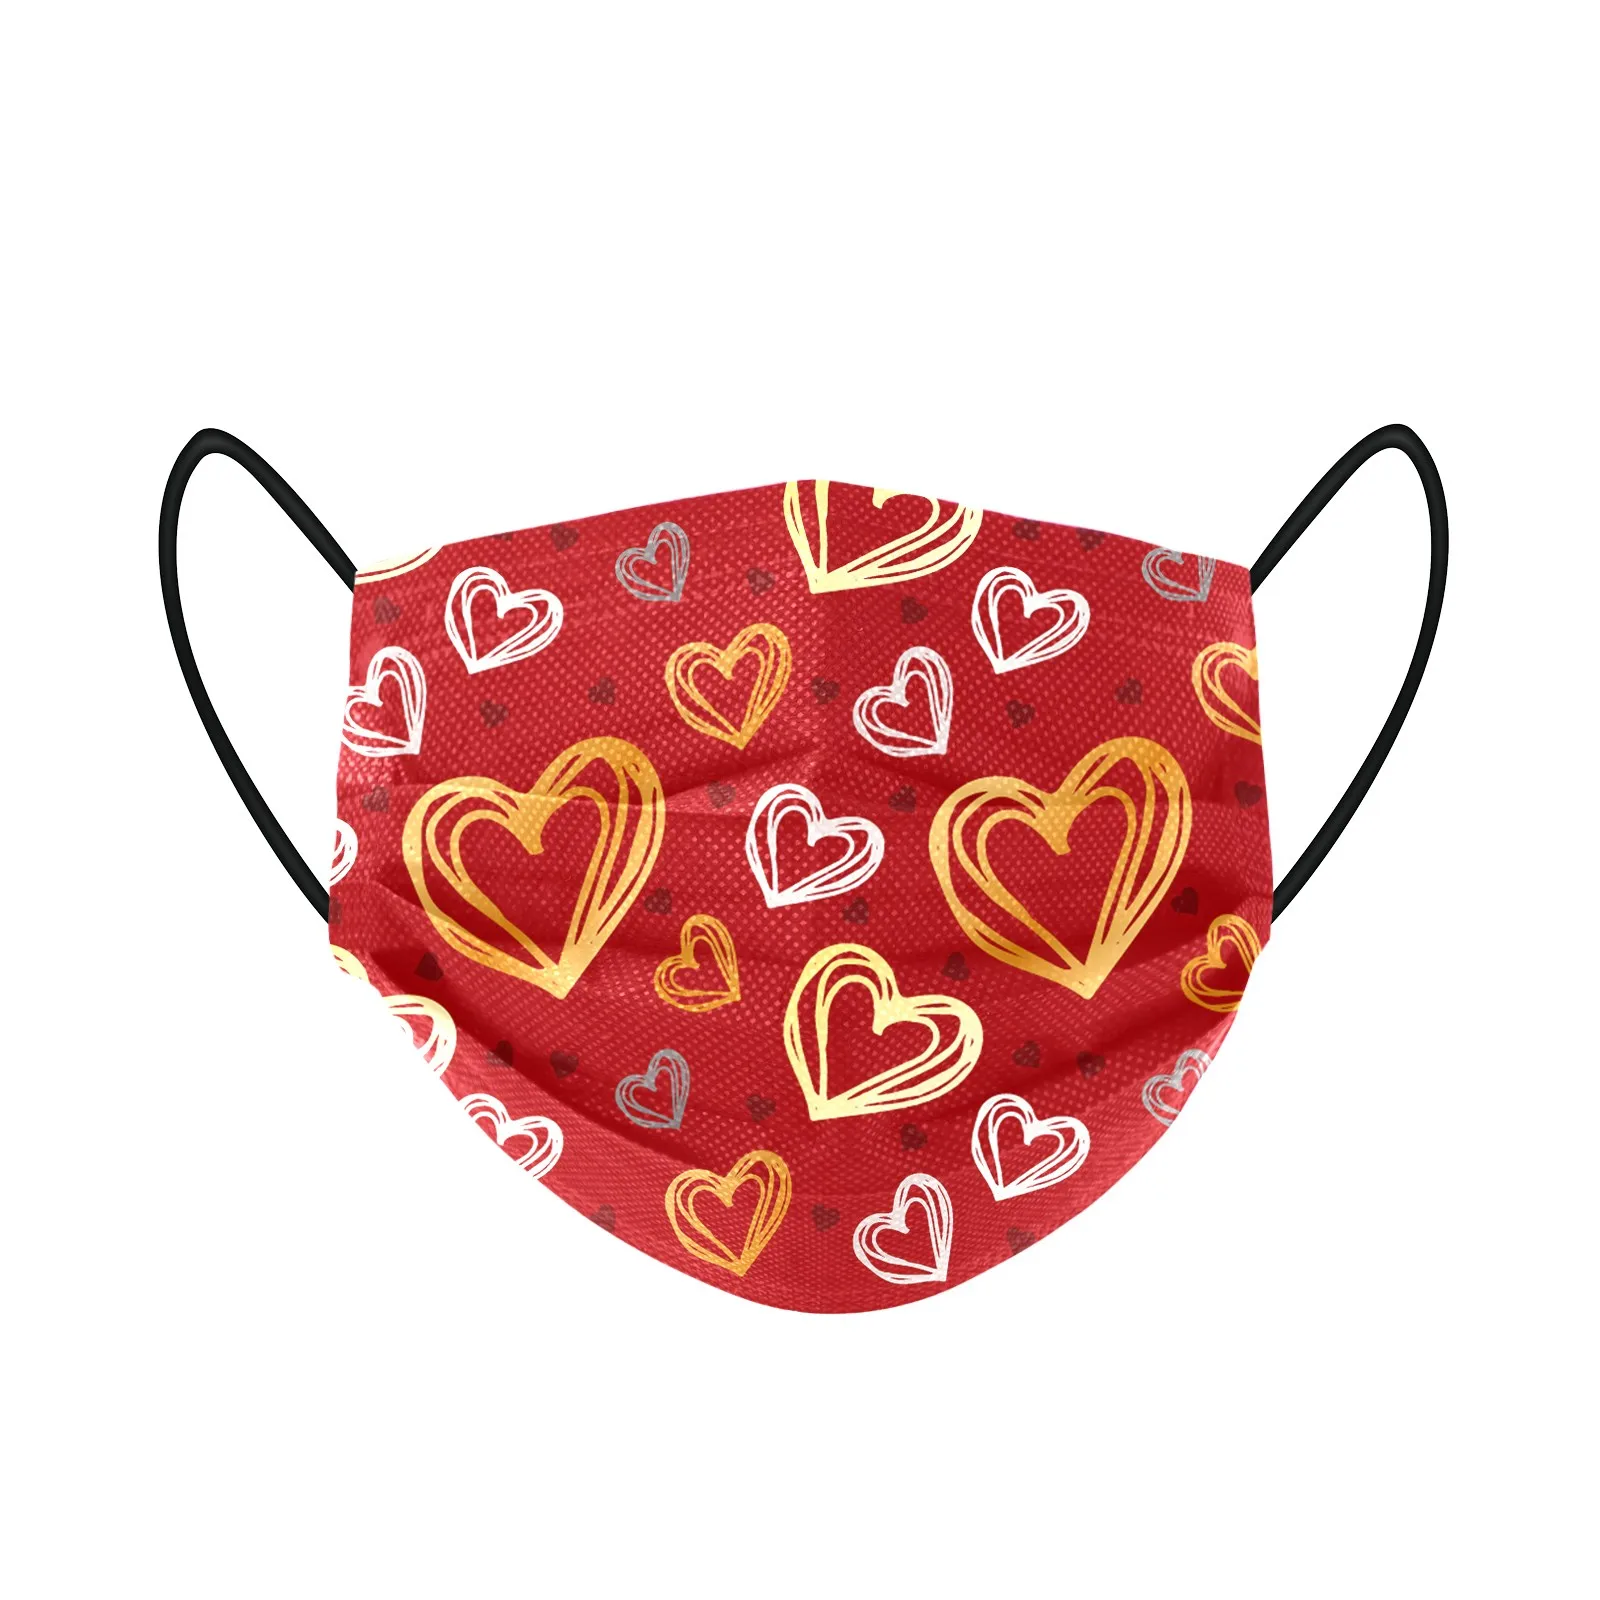 funny couples halloween costumes 10/50pcs Adult's Valentine's Day Love Mask Disposable Protective Face Masks Lover Sweet Heart Print Masks Halloween Cosplay Mask homemade halloween costumes